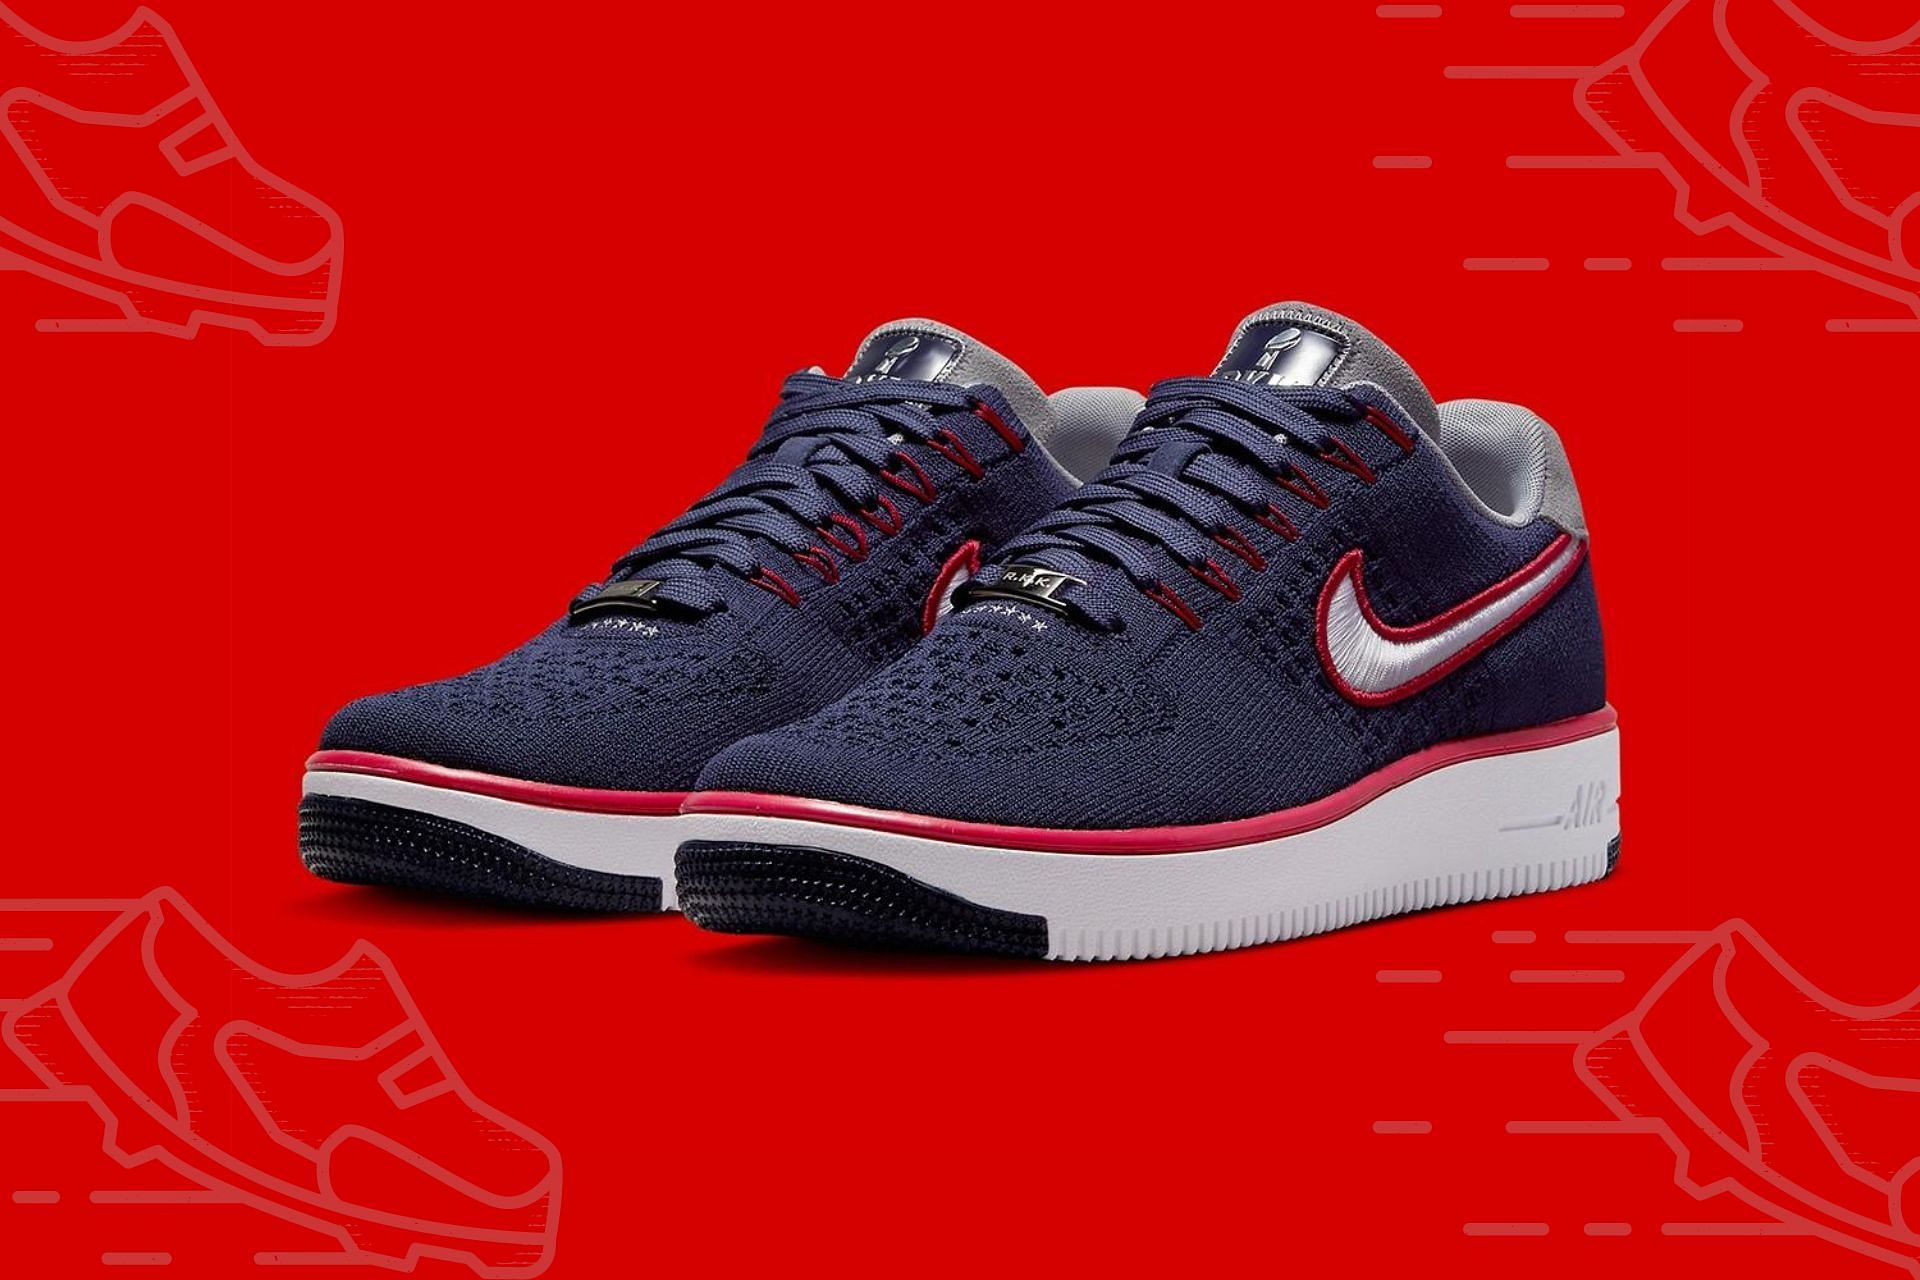 Greeting scramble Price cut Where to buy Nike Air Force 1 Ultra Flyknit Low New England Patriots?  Price, release date, and more explored